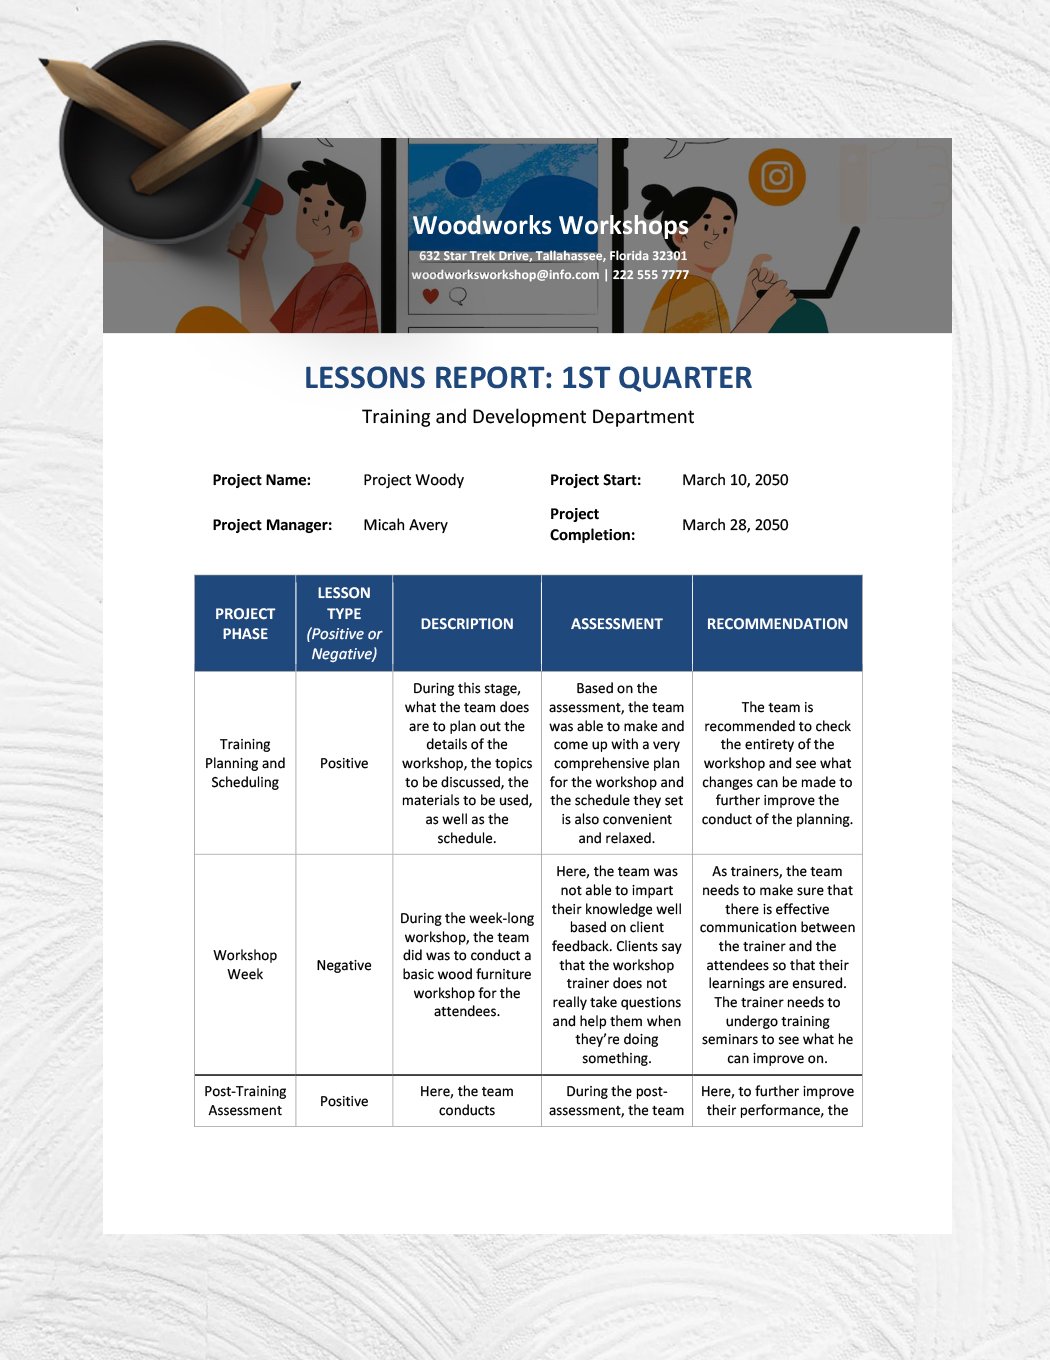 Workshop Lessons Learned Template